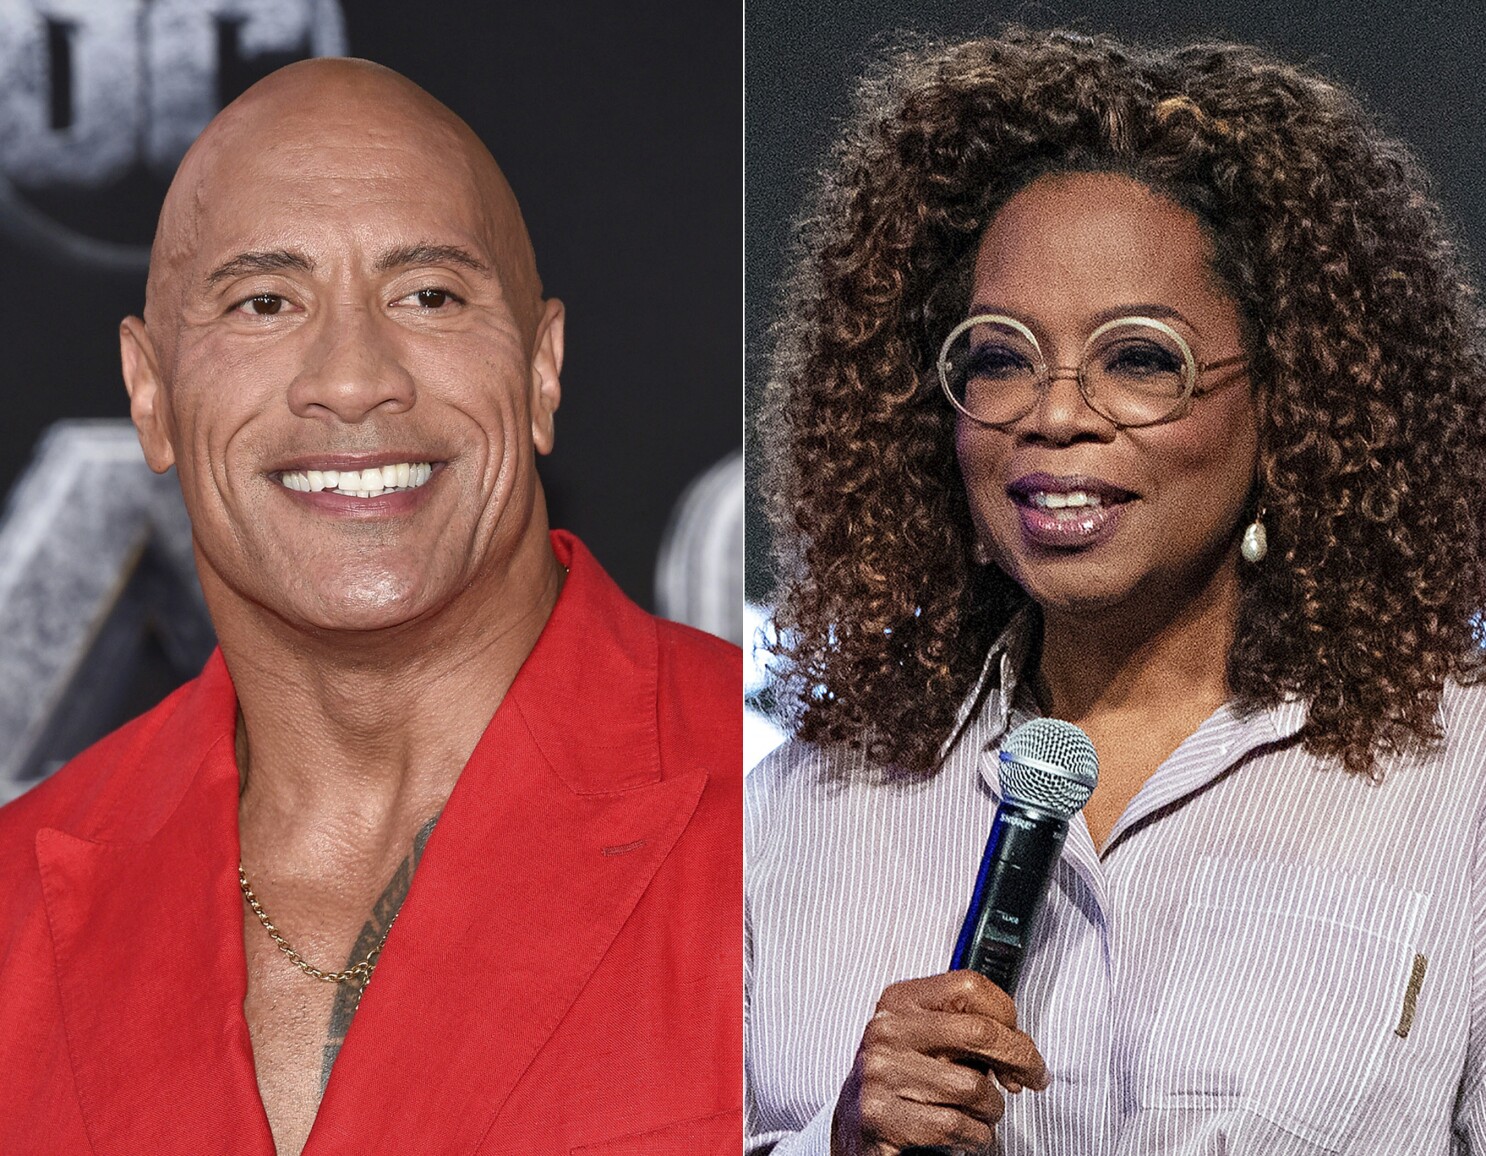 The Rock and Oprah Winfrey donate $10 million for Hawaii relief efforts